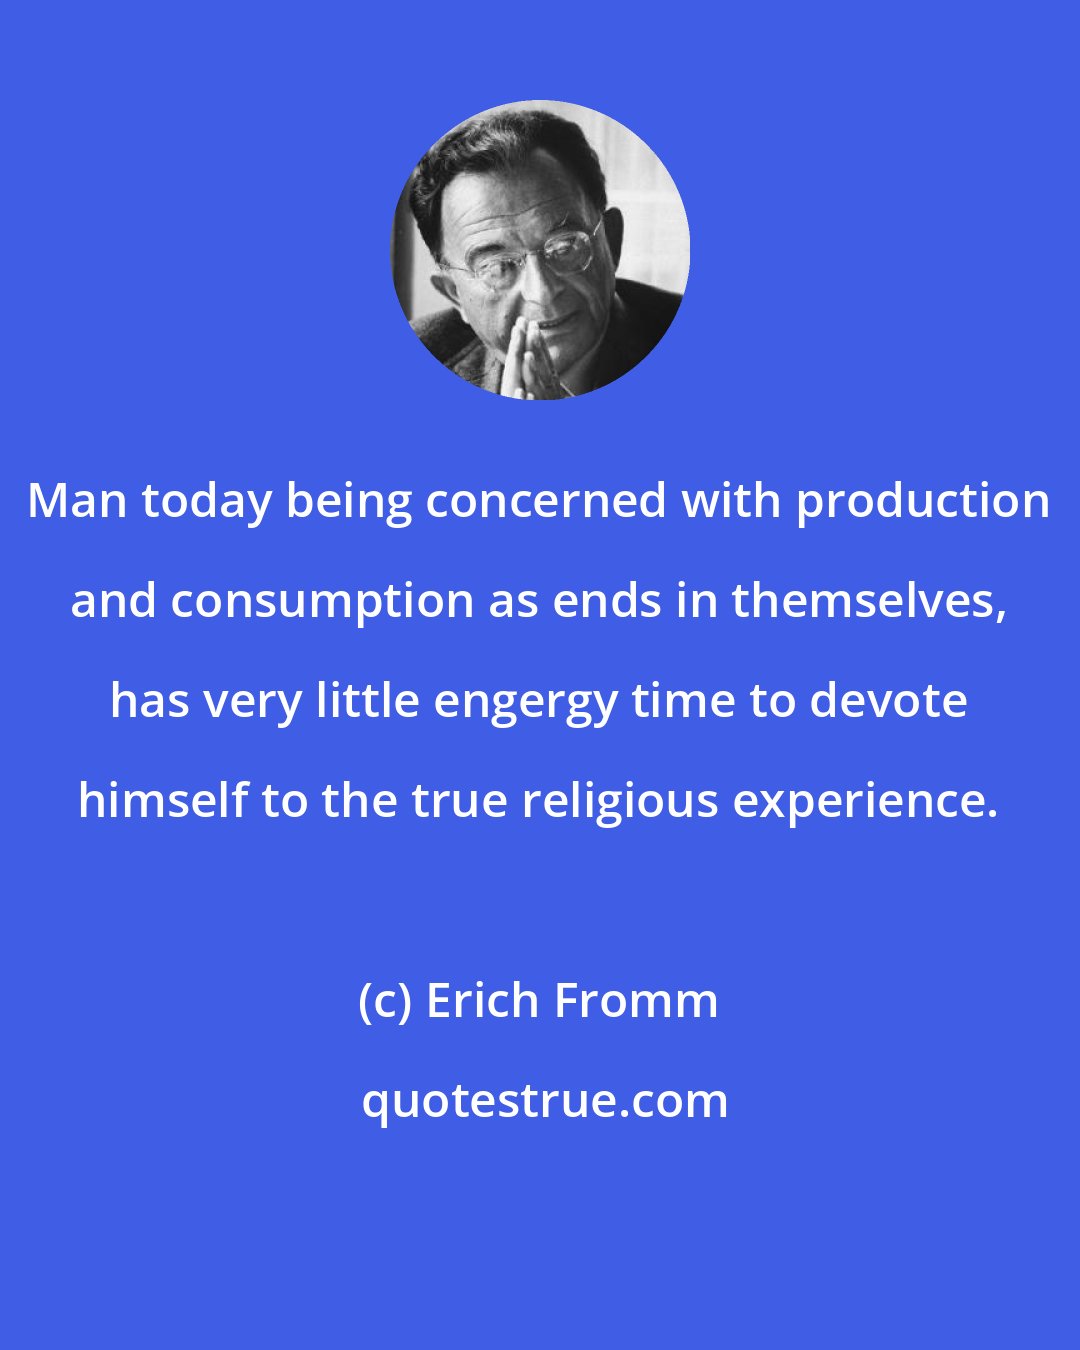 Erich Fromm: Man today being concerned with production and consumption as ends in themselves, has very little engergy time to devote himself to the true religious experience.